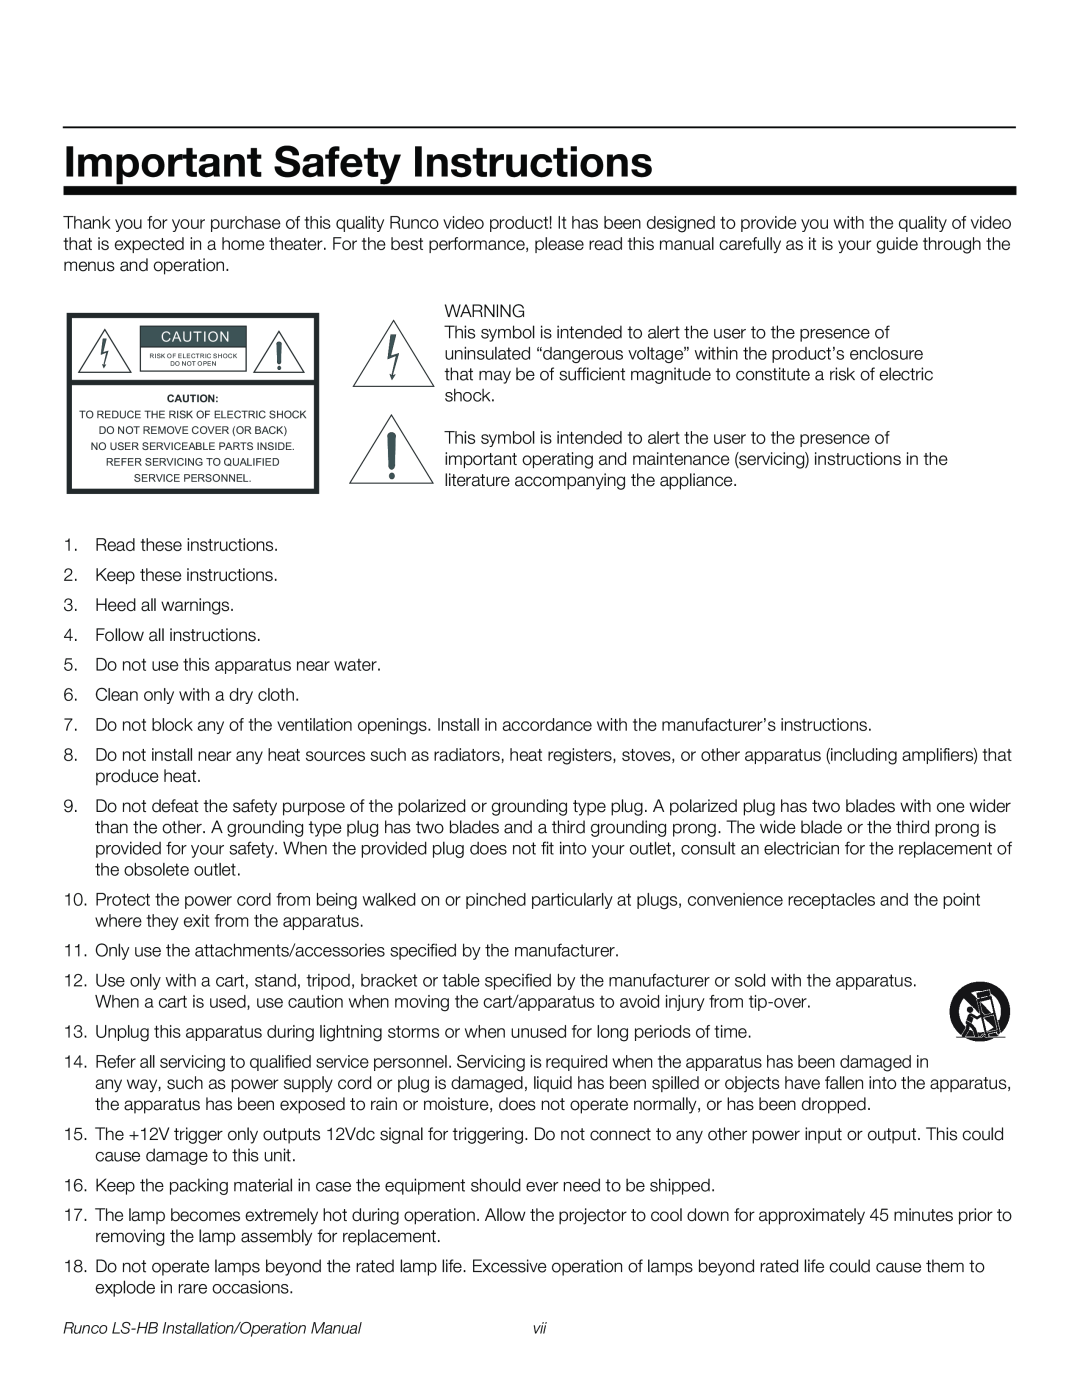 Runco LS-HB operation manual Important Safety Instructions 